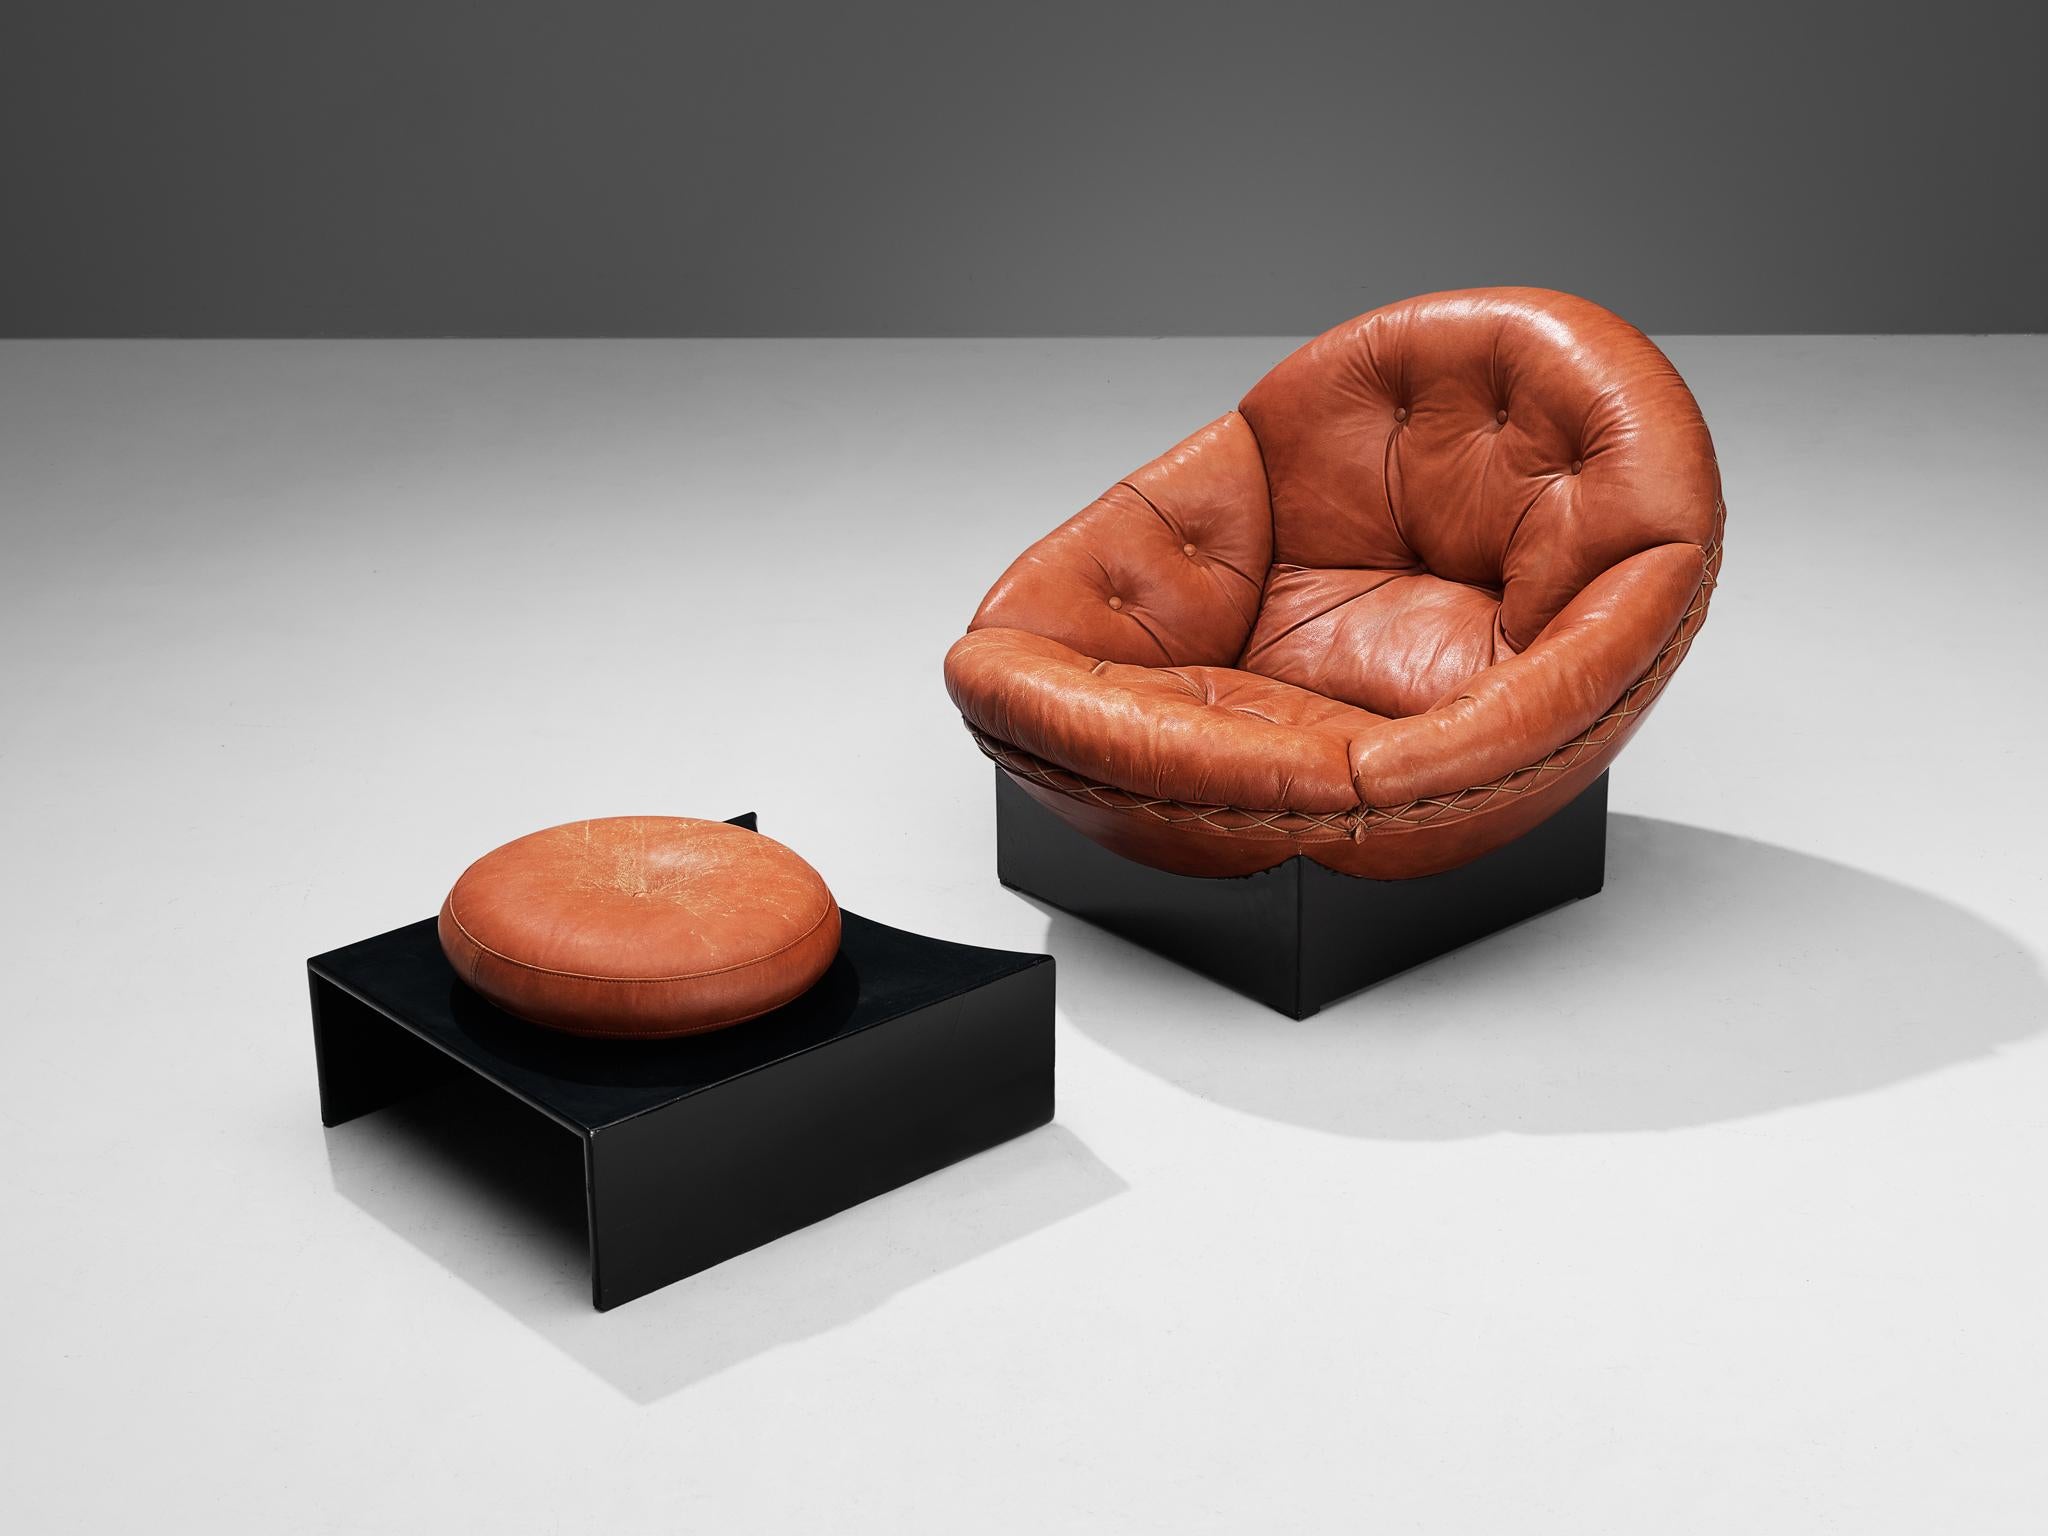 Illum Wikkelsø for Ryesberg Møbler, lounge chair with ottoman, model 'Apollo', leather, lacquered wood, Denmark, 1970s

This distinctive lounge set is of high-quality both in terms of functionality and beauty. The seat embraces great comfort due to